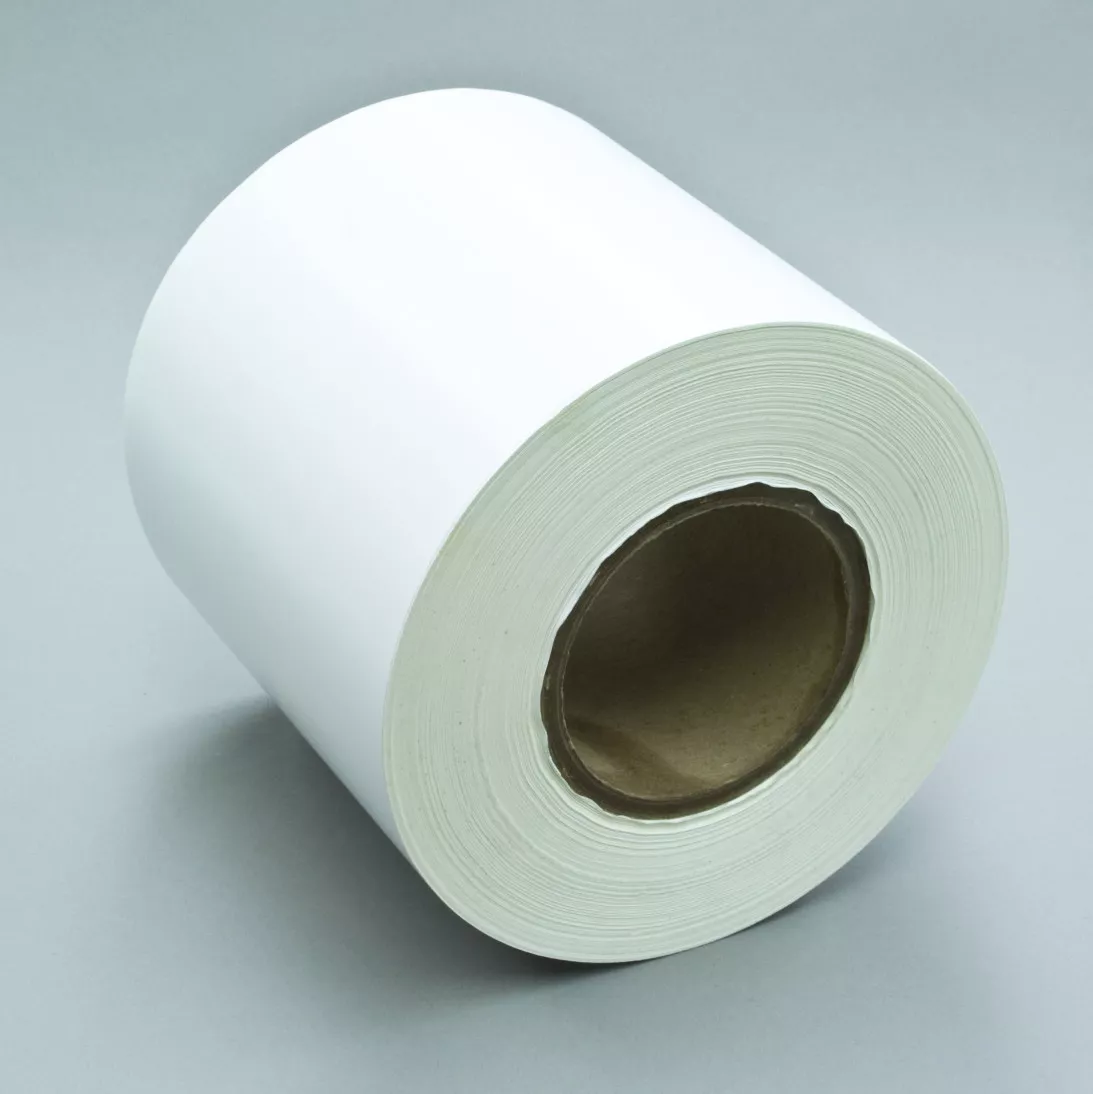 3M™ Removable Label Material 7600, White Vinyl Gloss, 6 in x 1668 ft, 1
roll per case